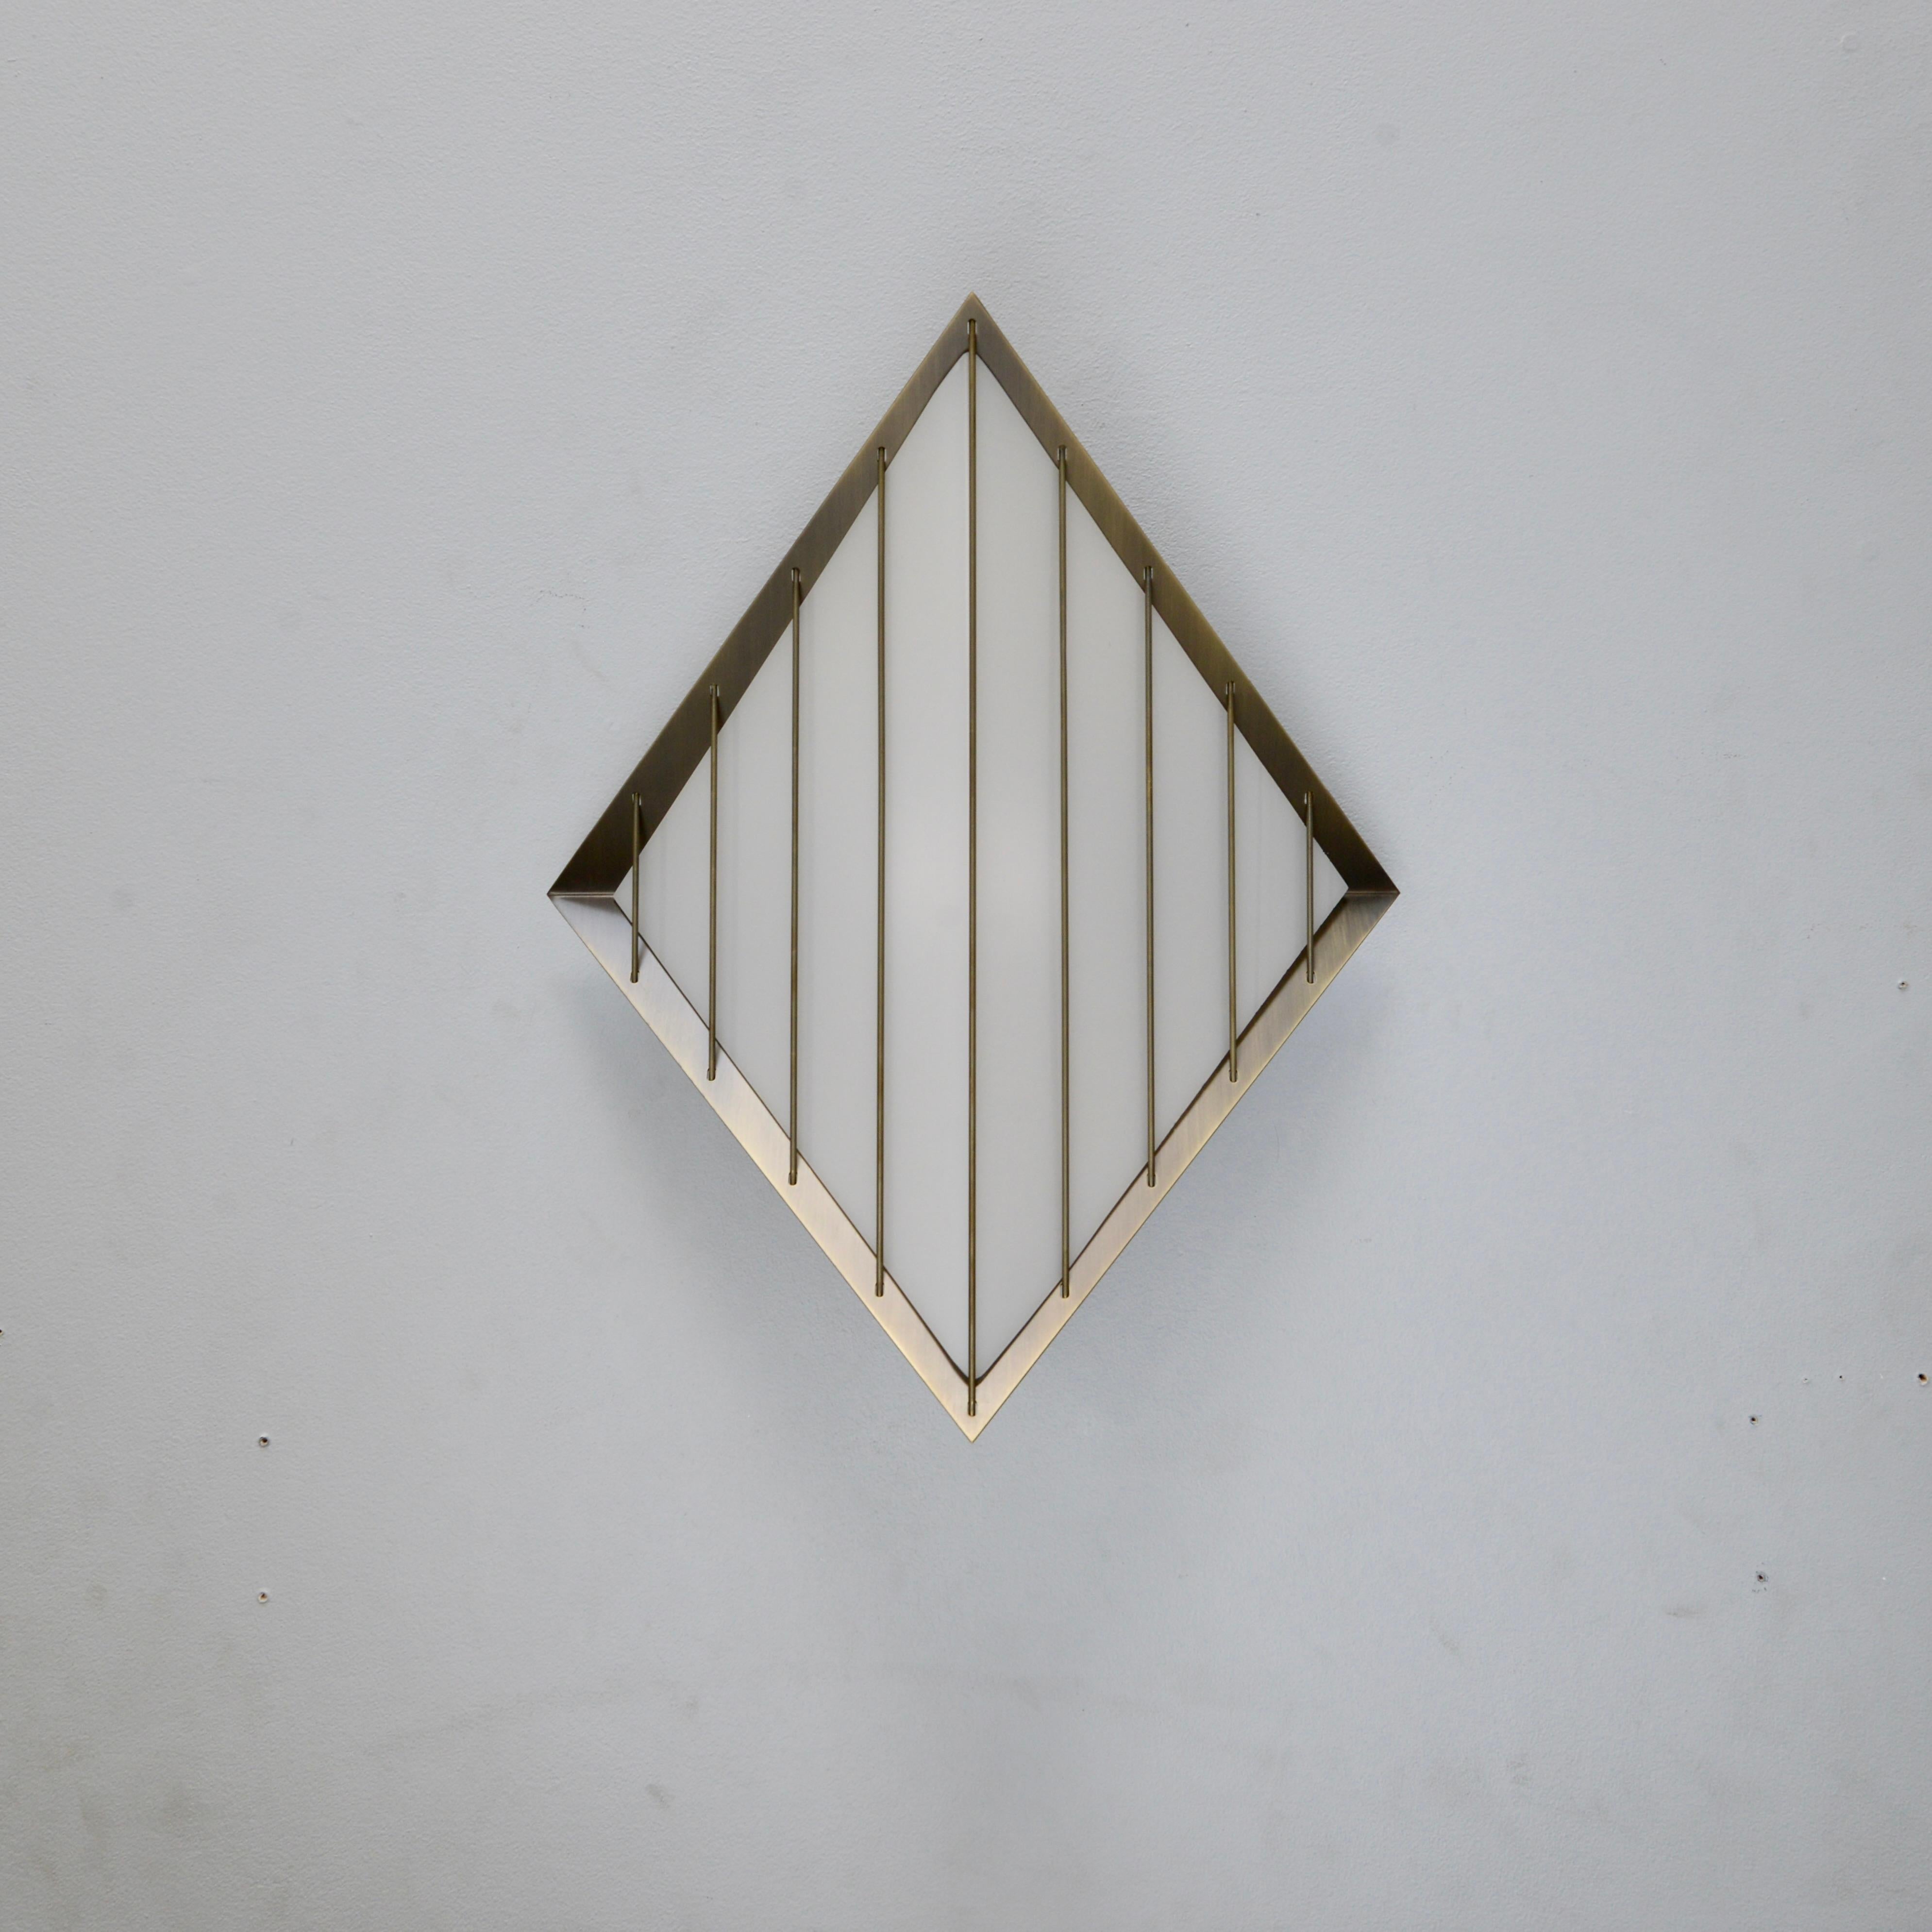 The Large LUdimanti Indoor Outdoor Sconce is part of Lumfardo Luminaires contemporary lighting collection and a larger interpretation of the LUdimanti I/O Sconce.
This diamond shaped brass and acrylic sconce is made to order and can be used either